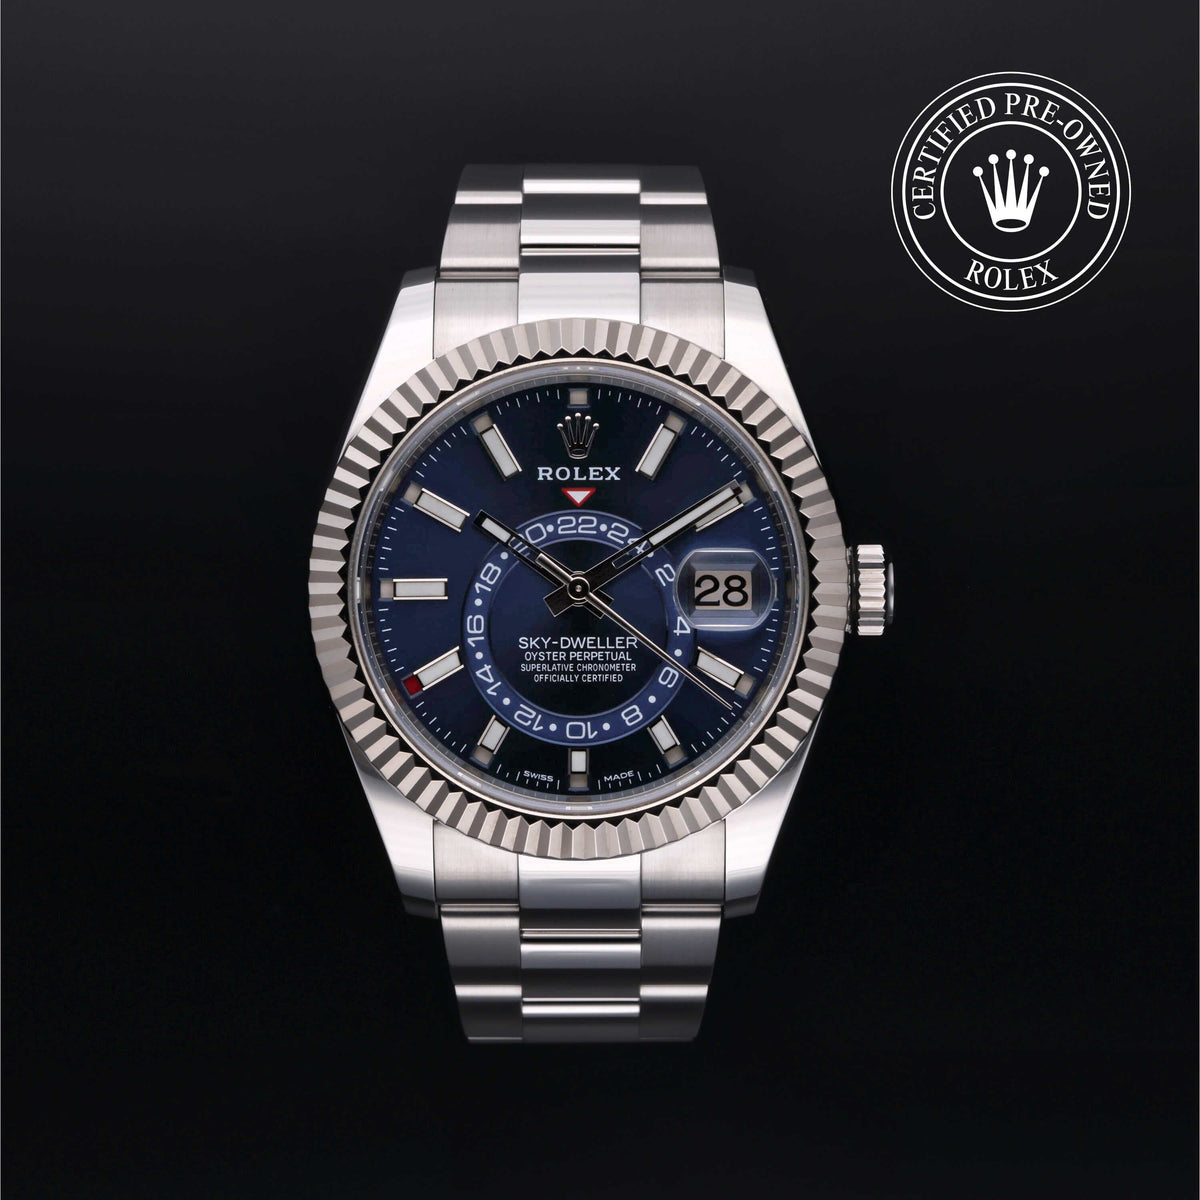 Rolex Certified Pre-Owned Sky-Dweller in Oyster, 42 mm, Stainless Steel and 18k White Gold 326934 watch available at Long's Jewelers.